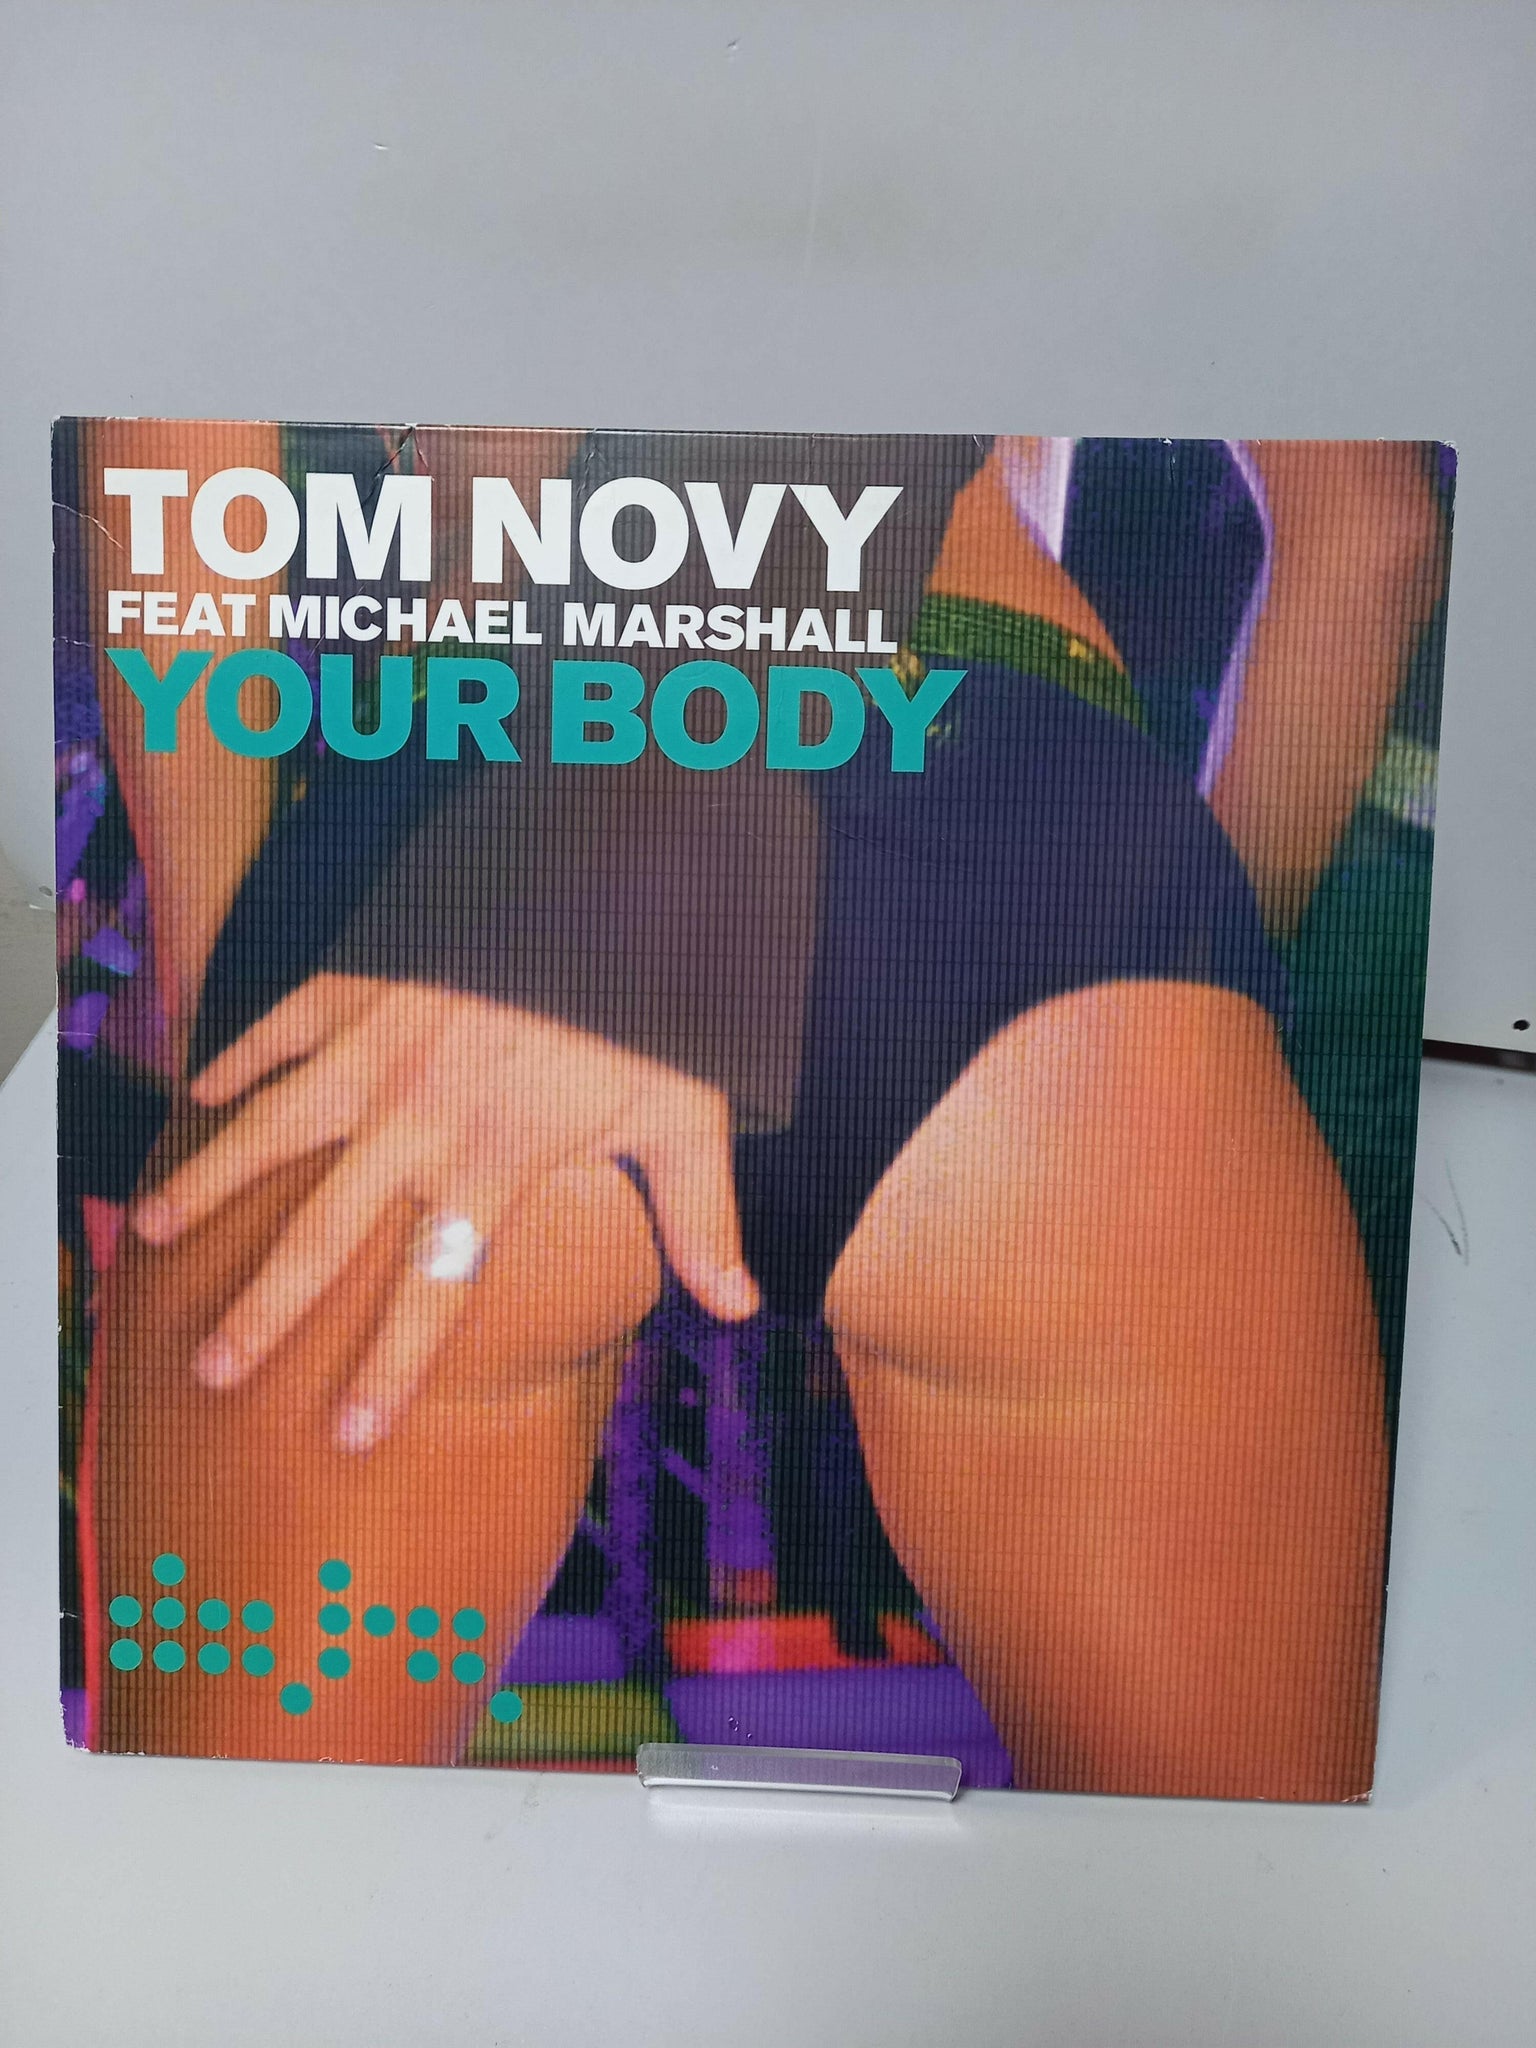 Tom Novy feat Micheal Marshall - Your Body 12